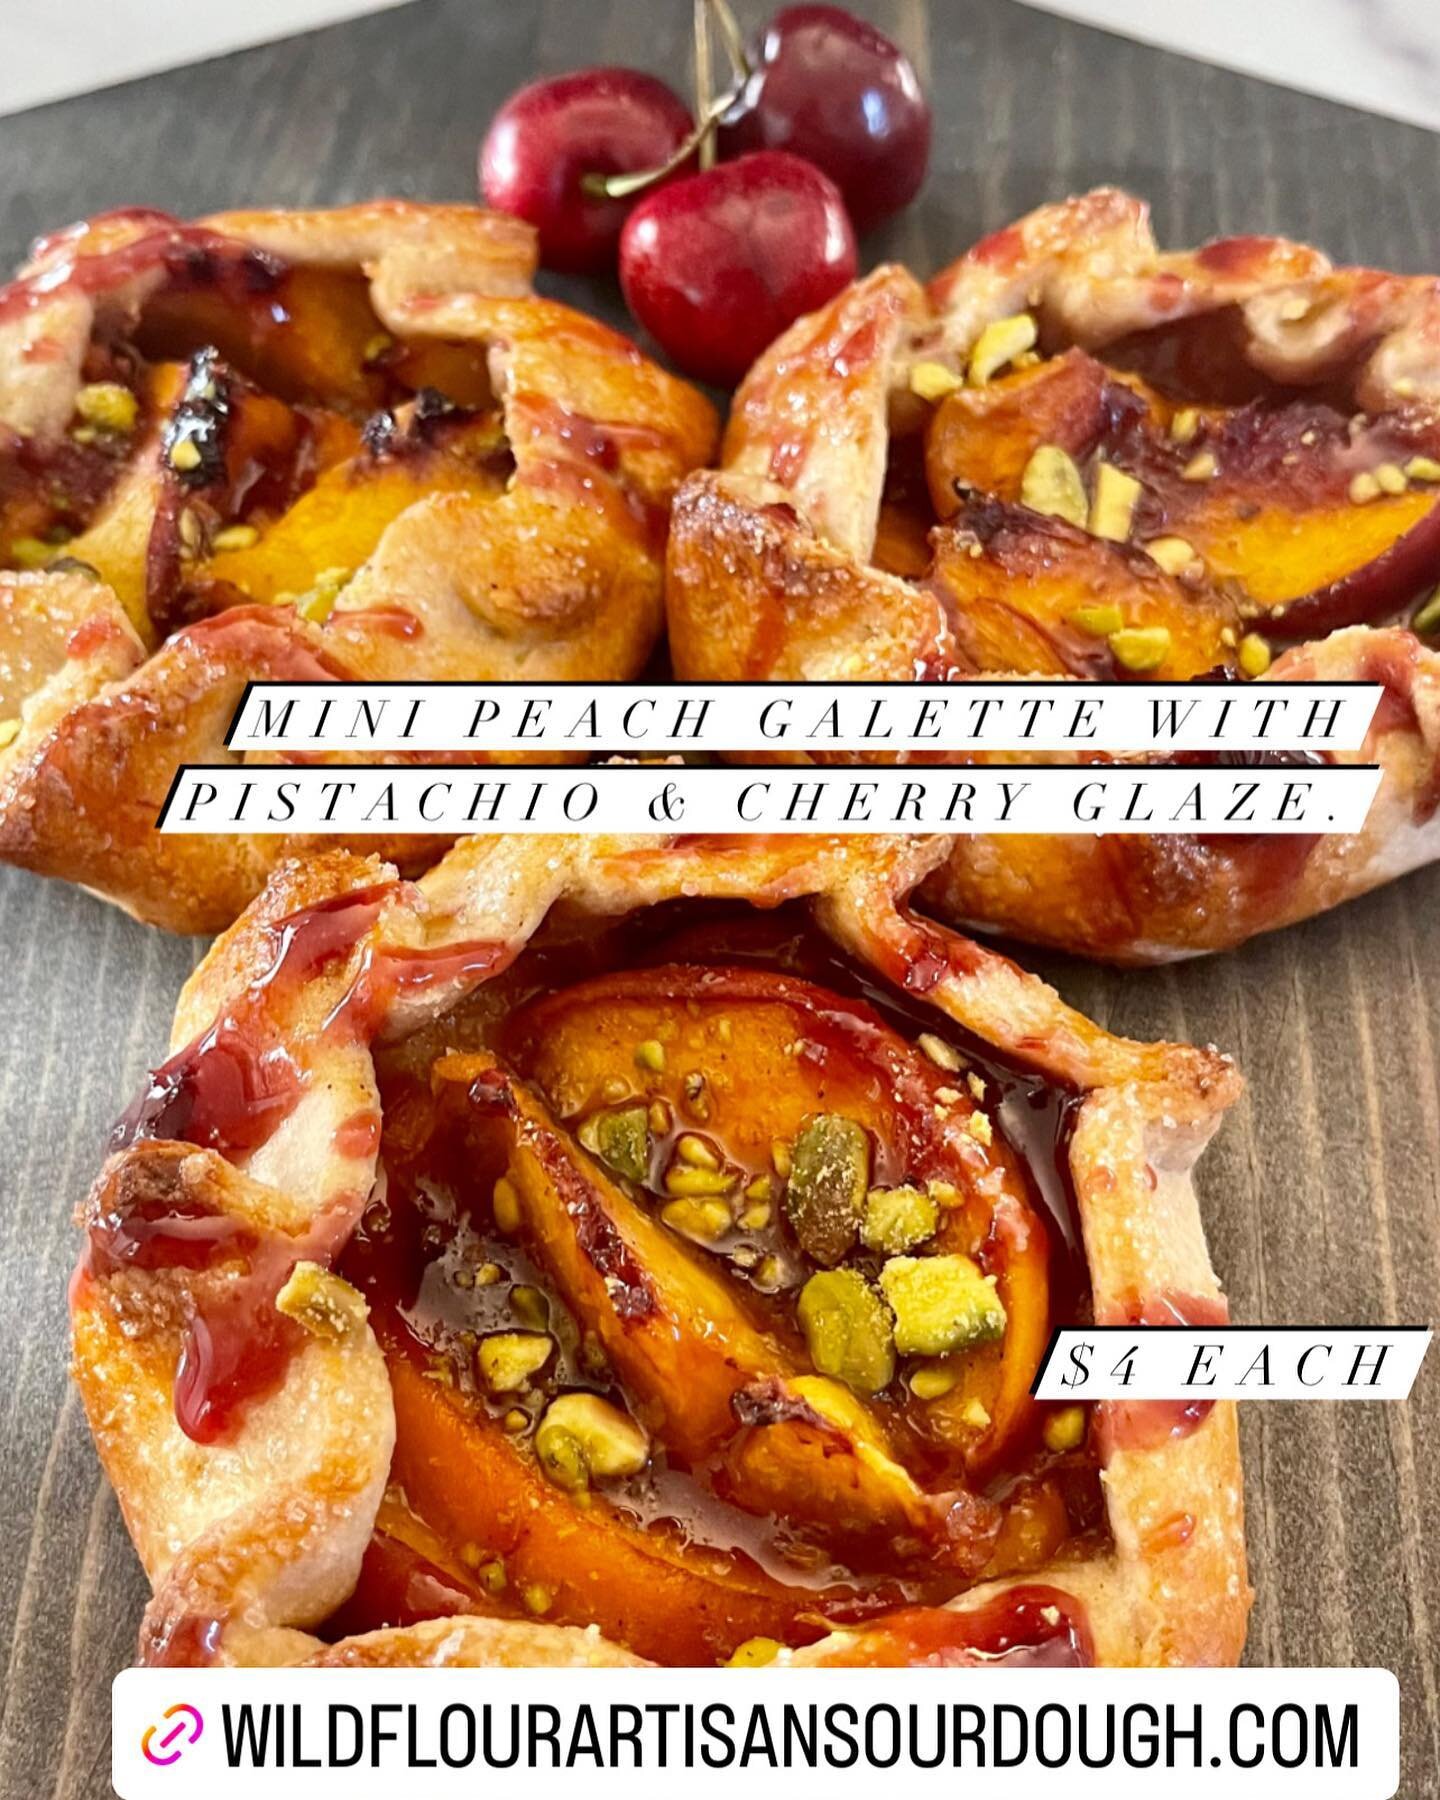 Couldn&rsquo;t let stone-fruit season pass us by without a galette.  Sourdough pie dough made with  @eckfarms freshly milled Sonora wheat.  Peaches with a hint of ginger and lightly dusted with pistachios.  Finished with a cherry glaze.  Two stone-fr